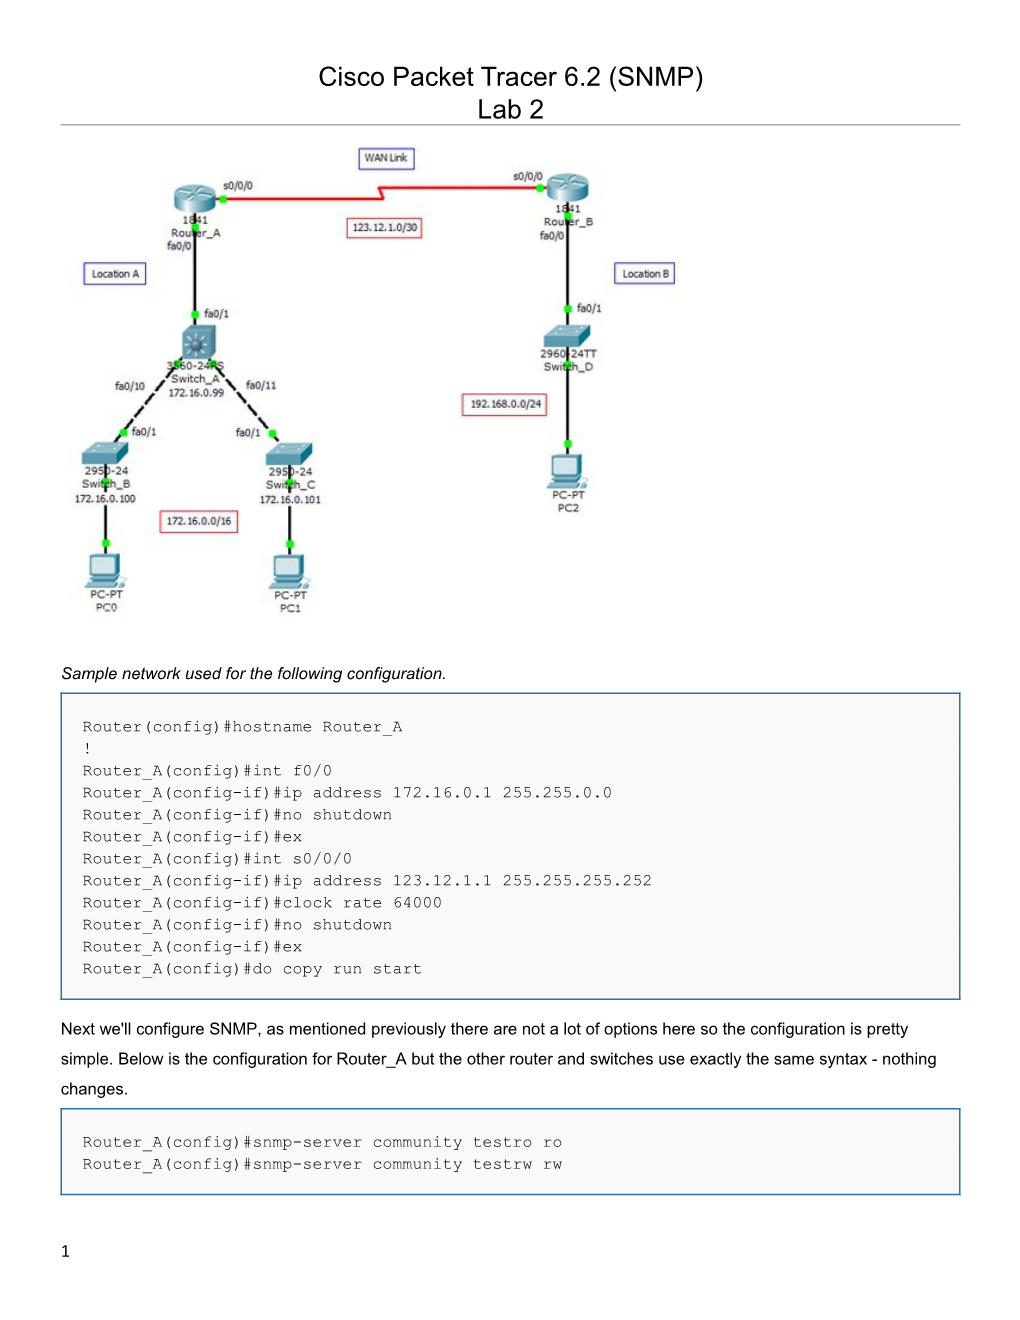 Sample Network Used for the Following Configuration